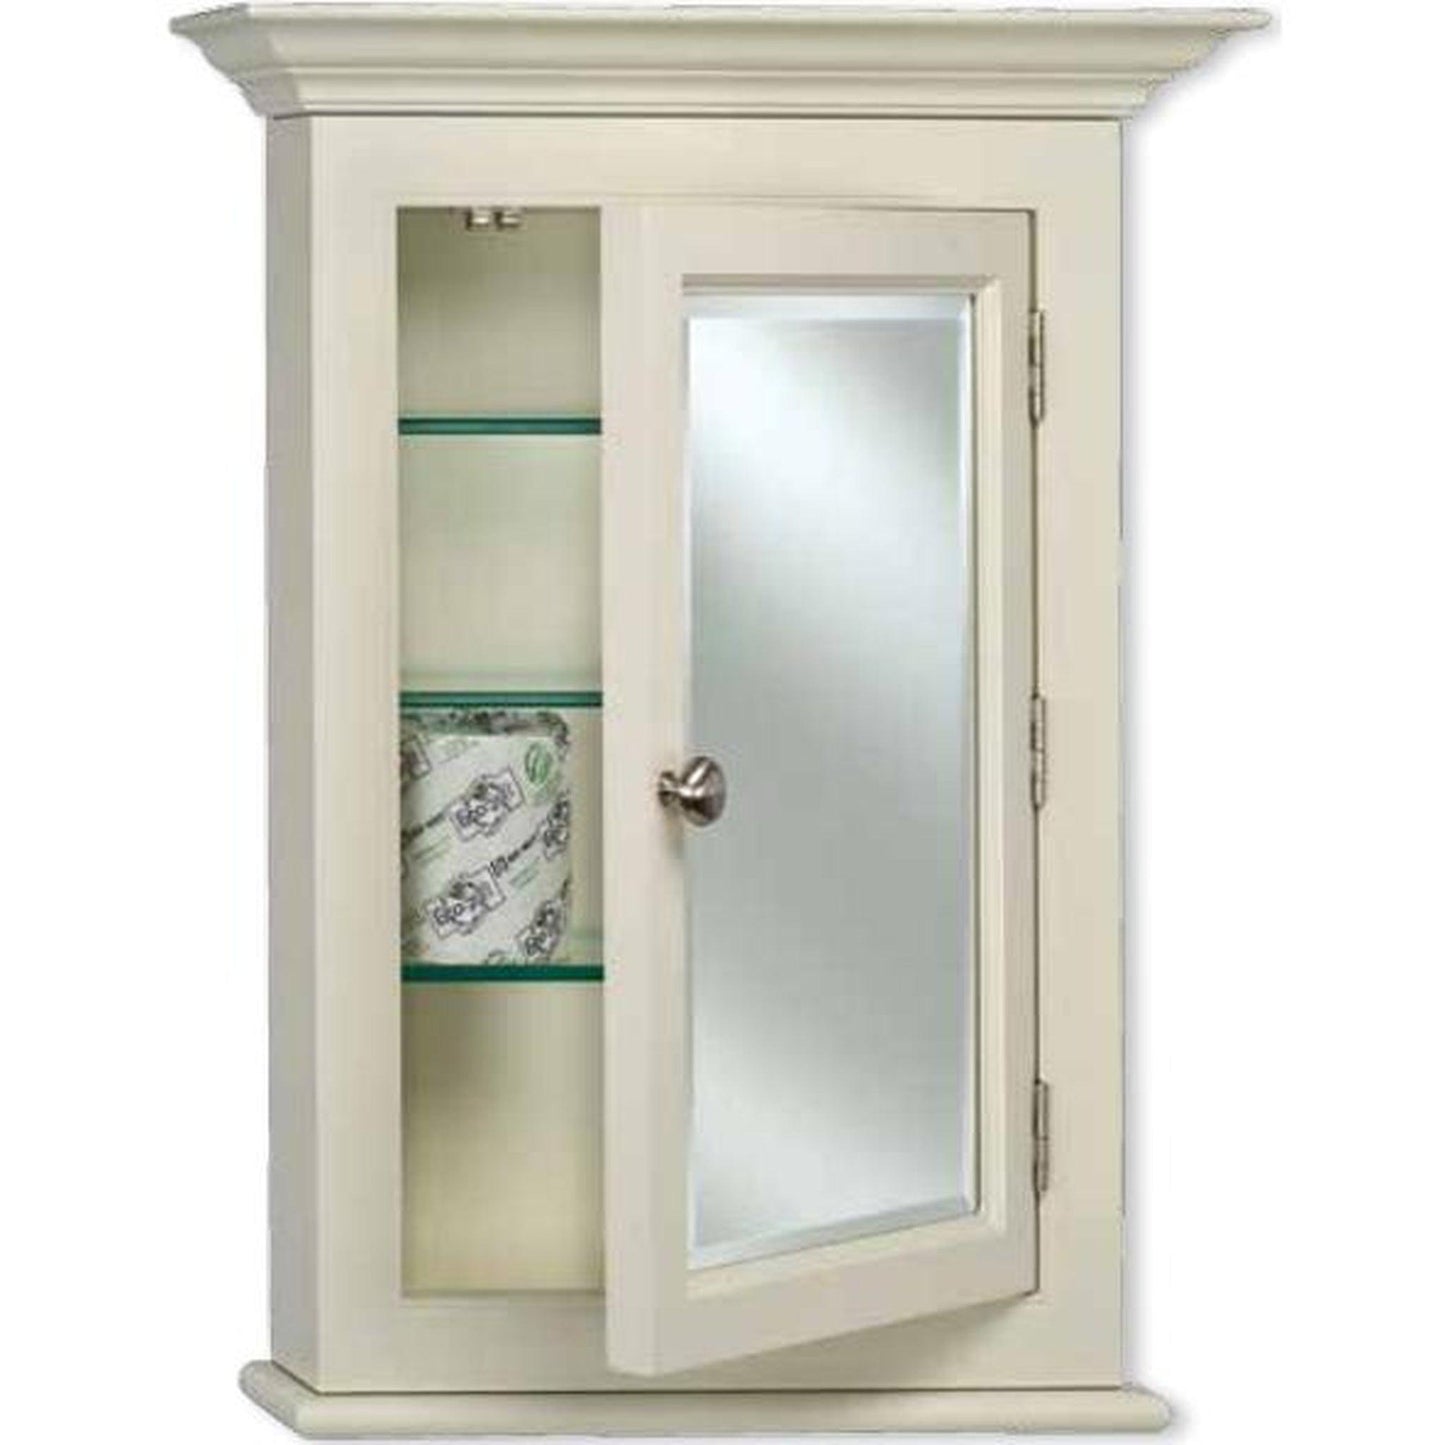 Afina Wilshire II Small Biscuit Semi-Recessed Right Hinged Single Door Medicine Cabinet With Beveled Edge Mirror